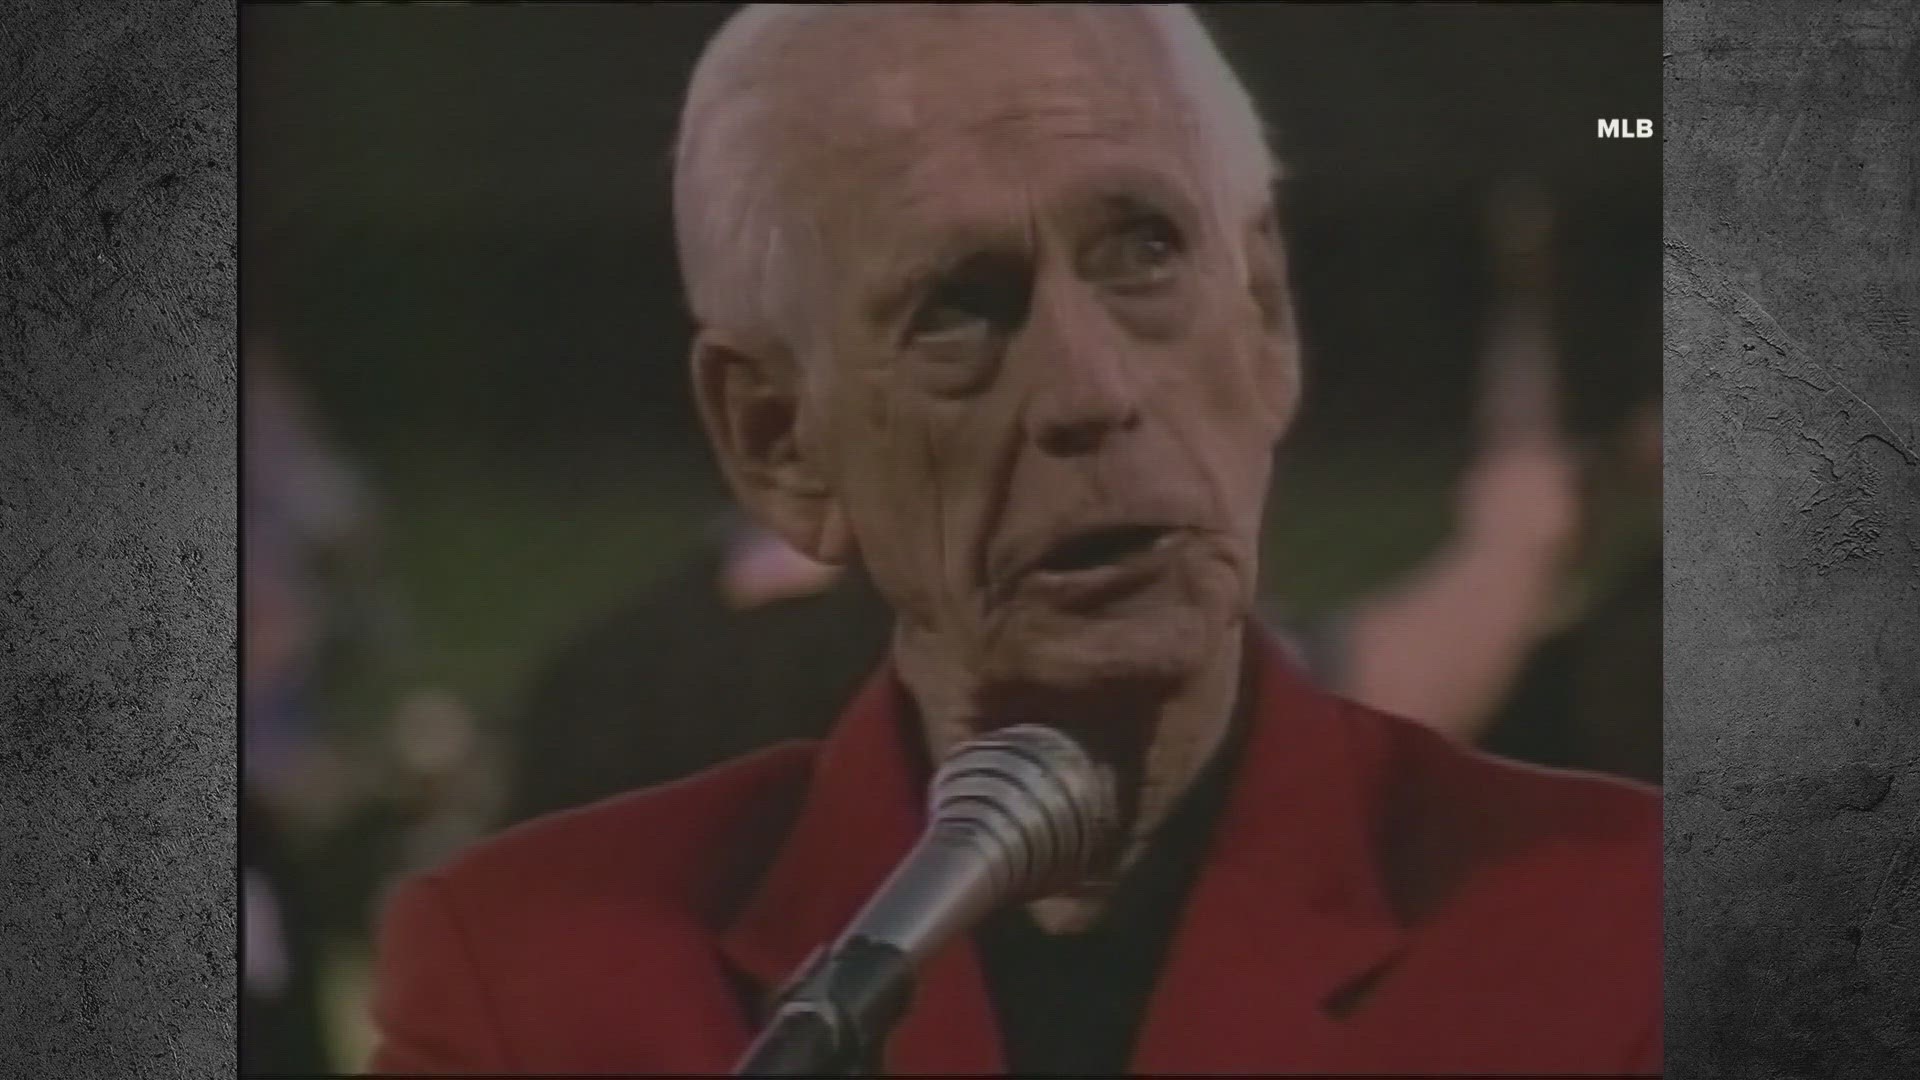 All that was needed was a voice. Broadcaster Jack Buck speaks to the nation after one of the darkest days in America's history 22 years ago.